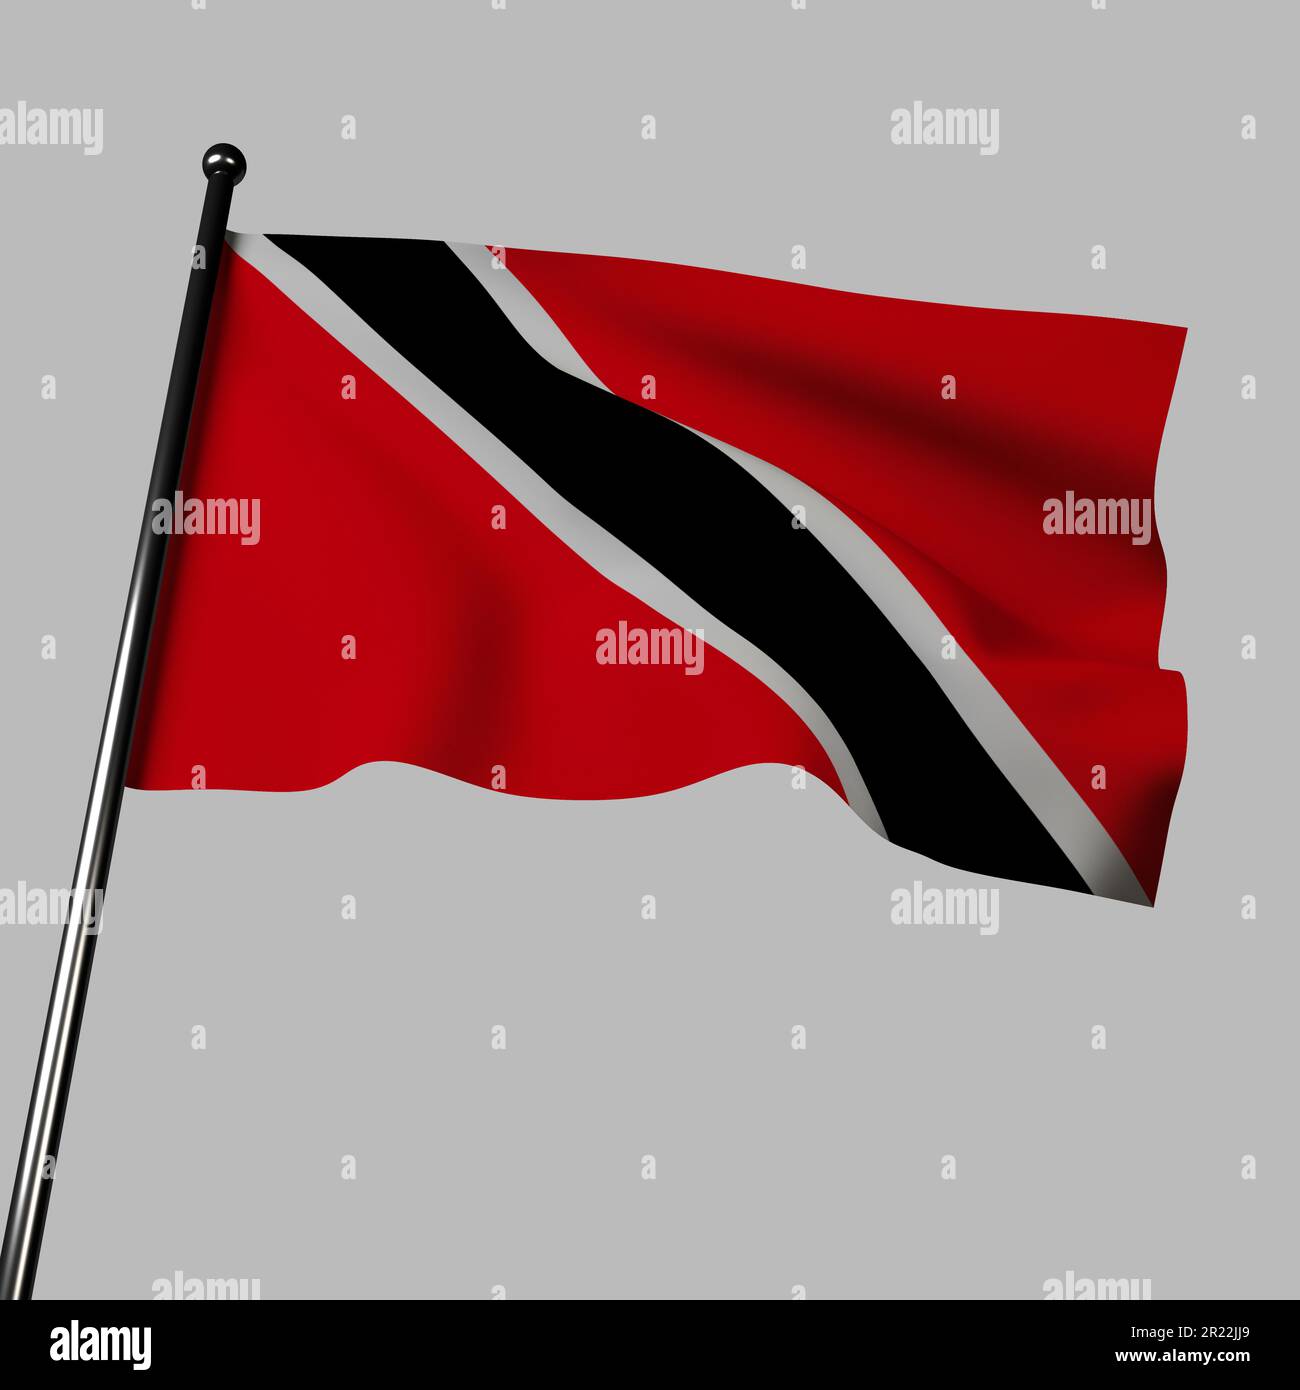 Trinidad and Tobago's flag waving in the wind, isolated on gray. The flag has horizontal bands of red, white, and black, with a white-edged black Stock Photo